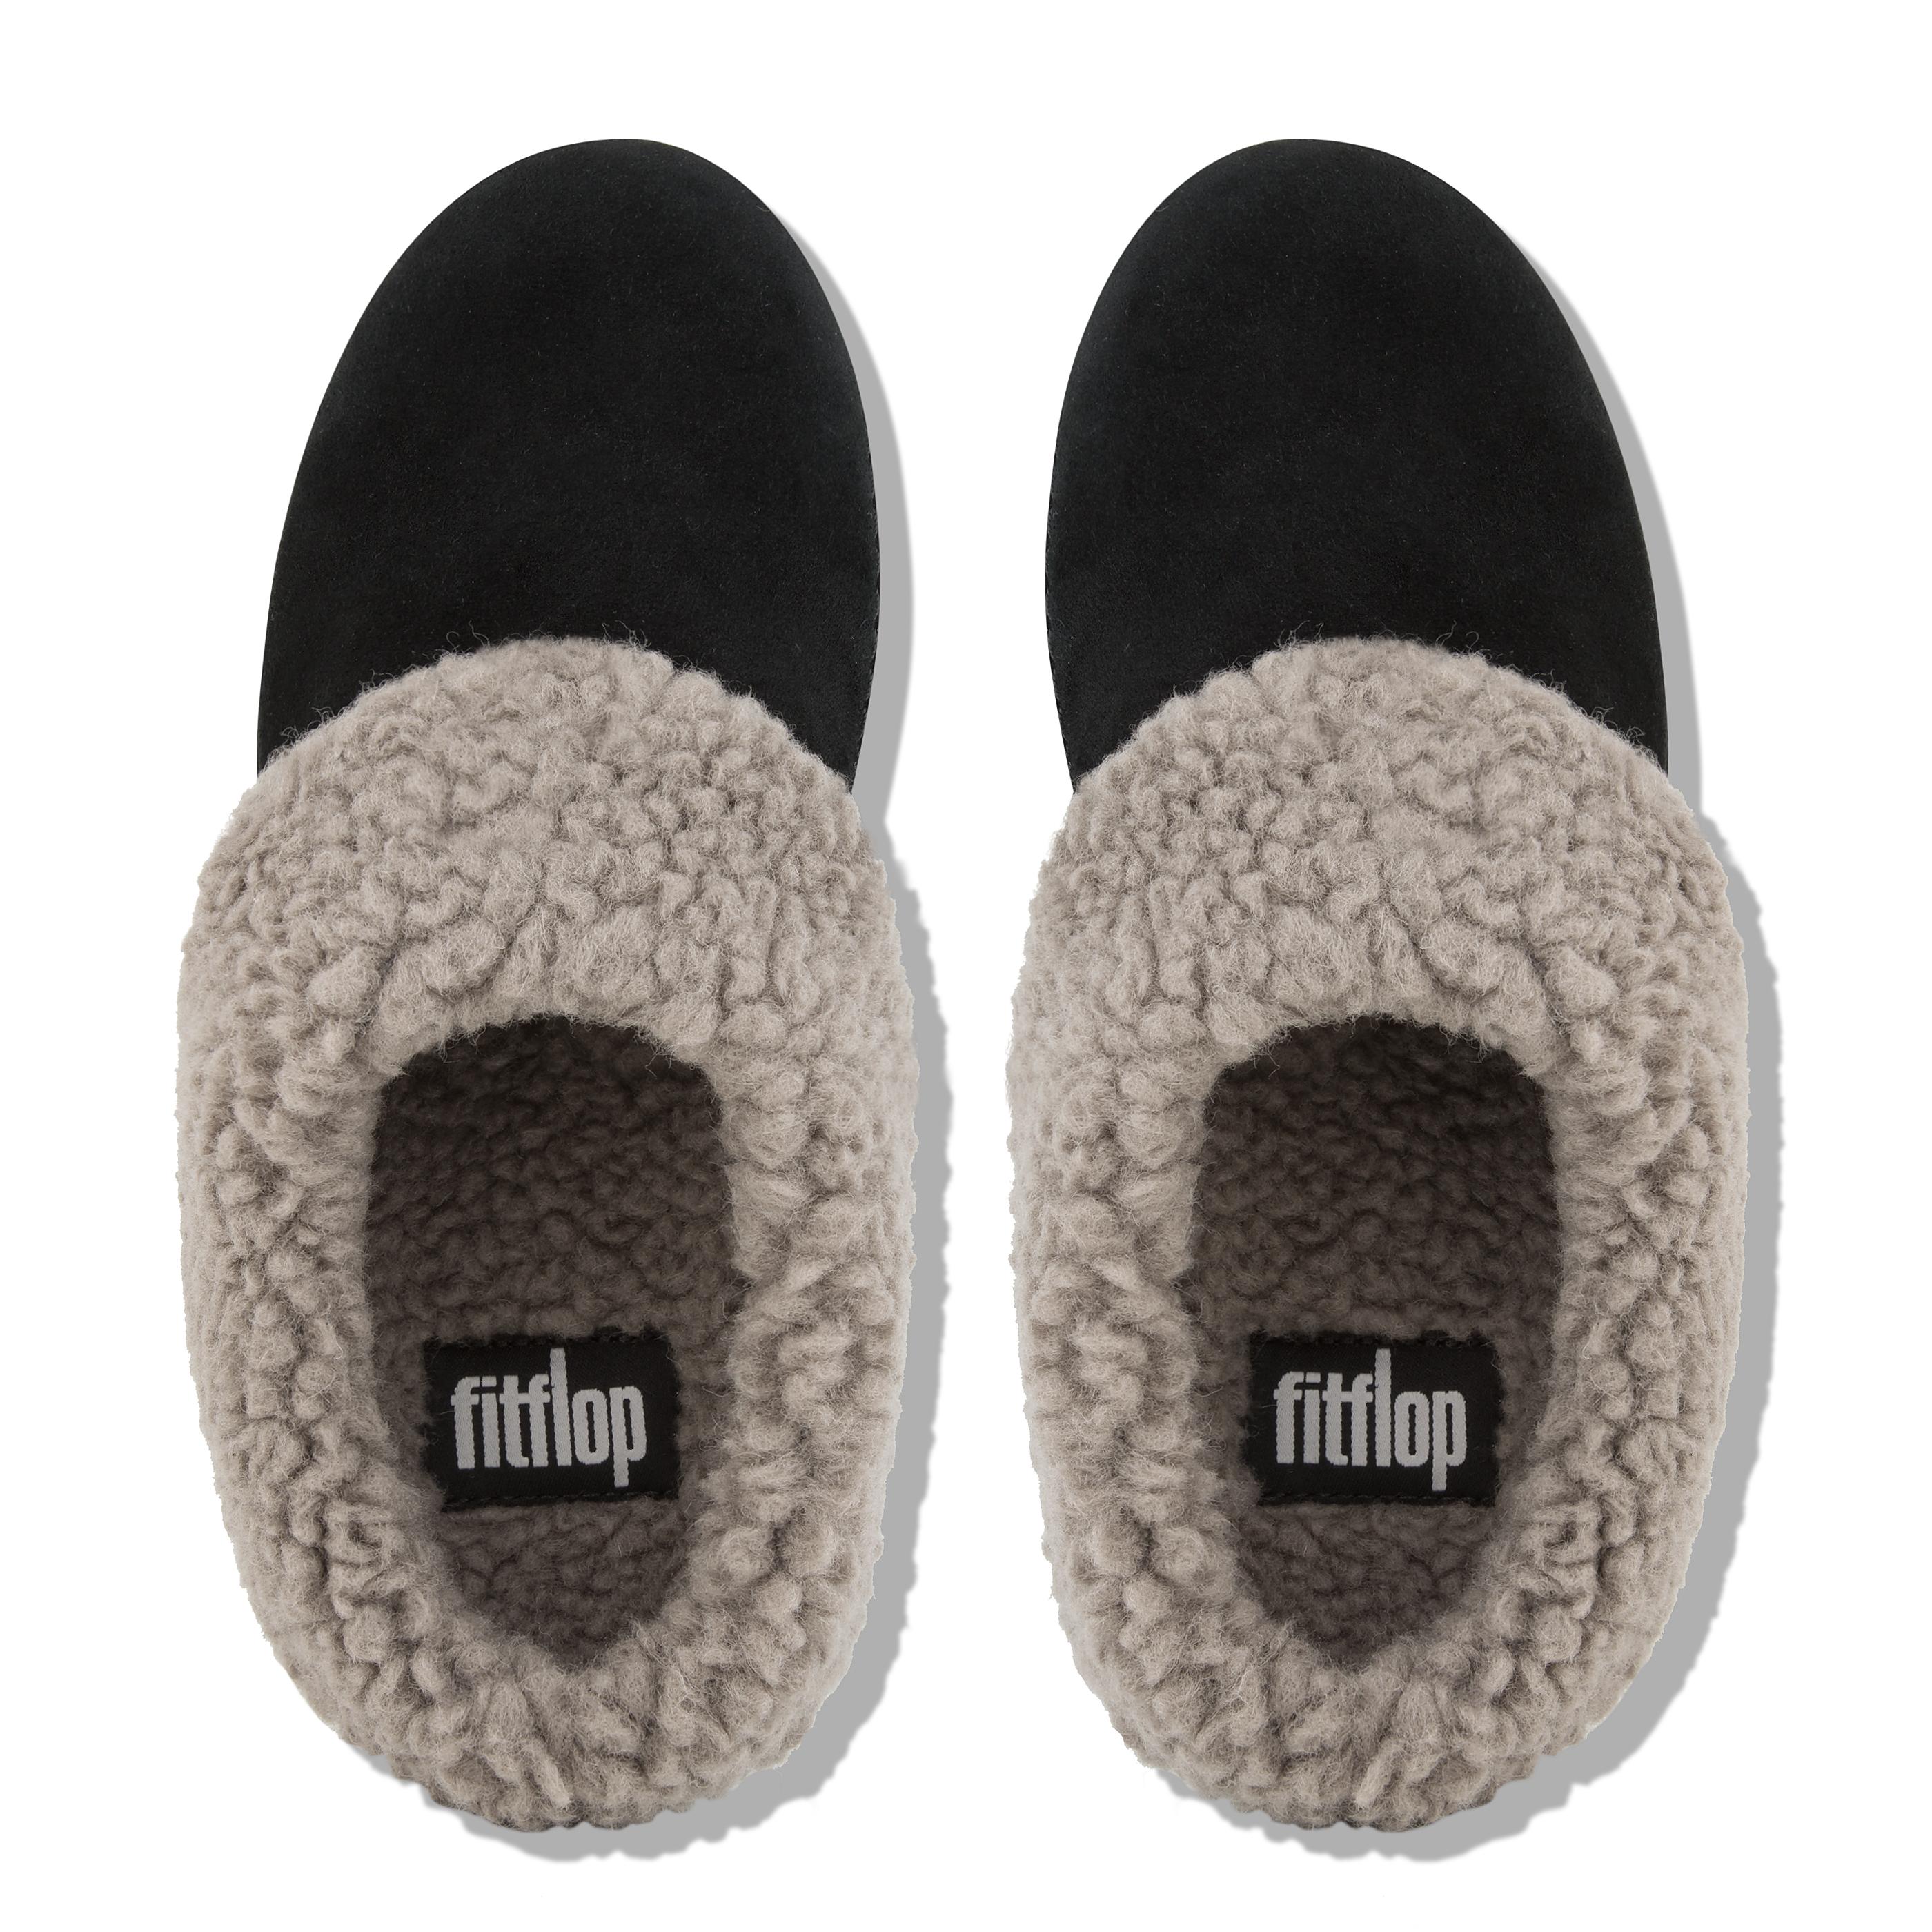 fitflop loaff slippers